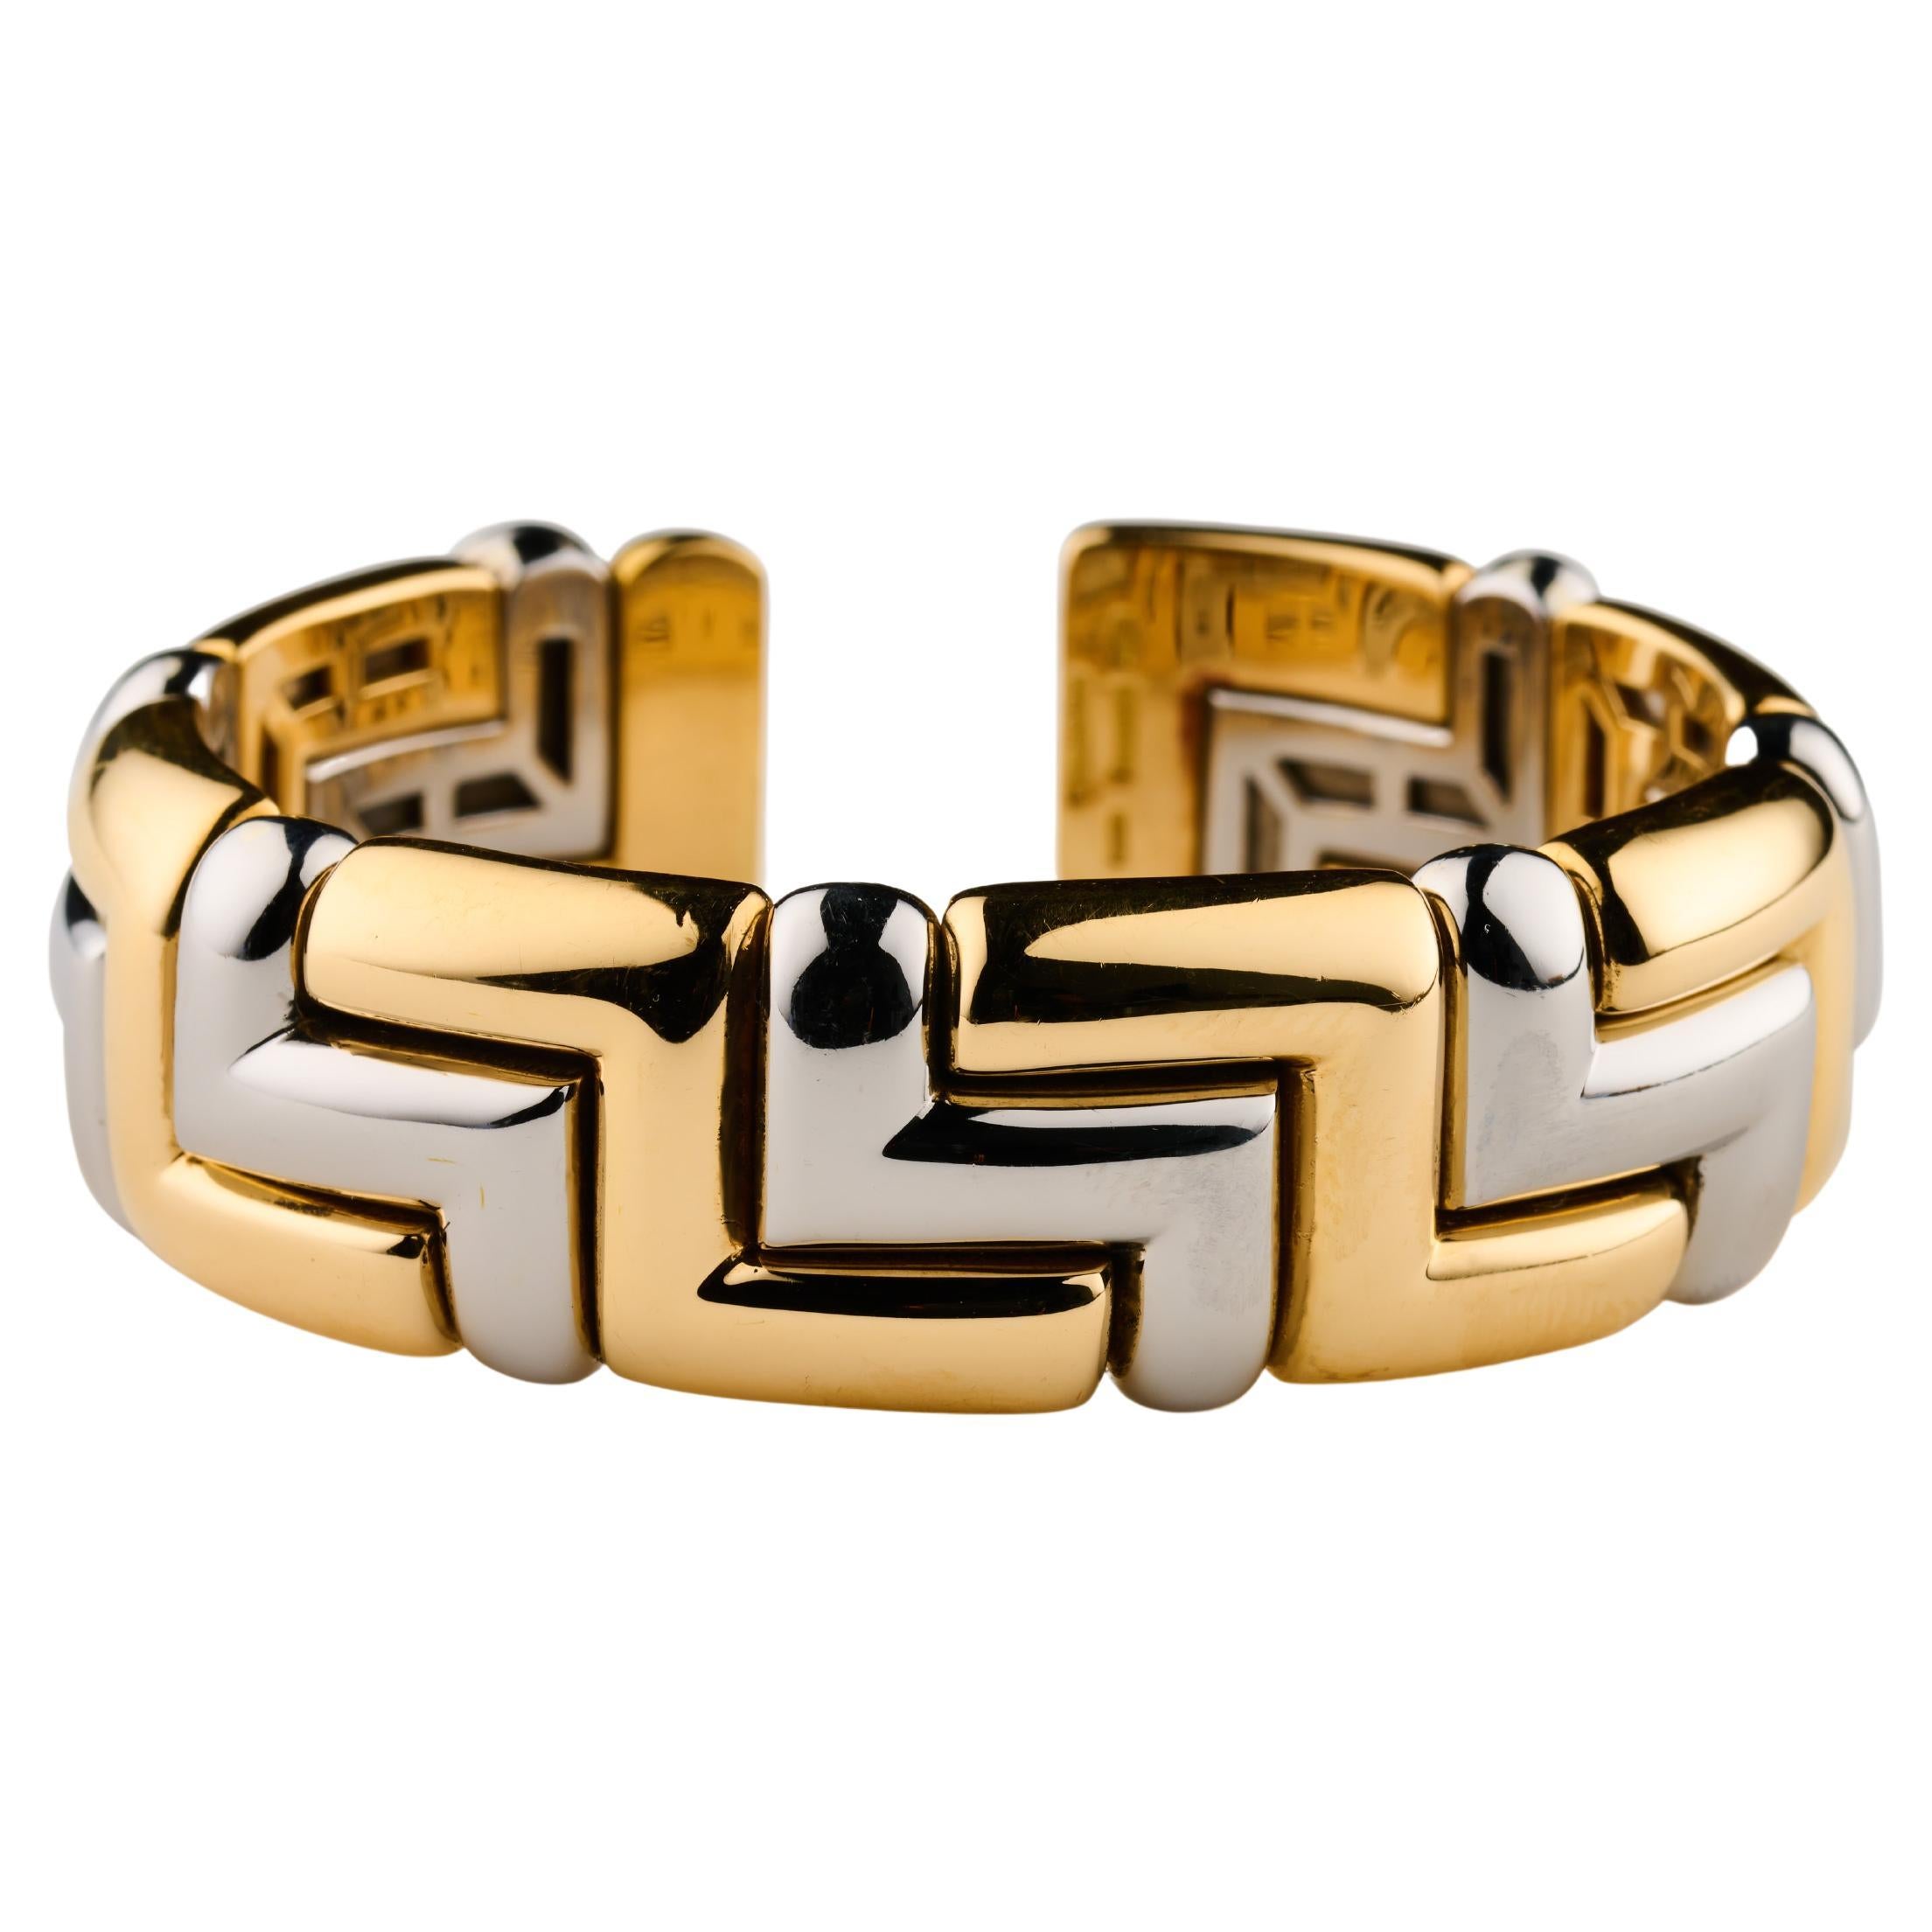 Bvlgari vintage yellow gold and steel cuff bangle bracelet For Sale